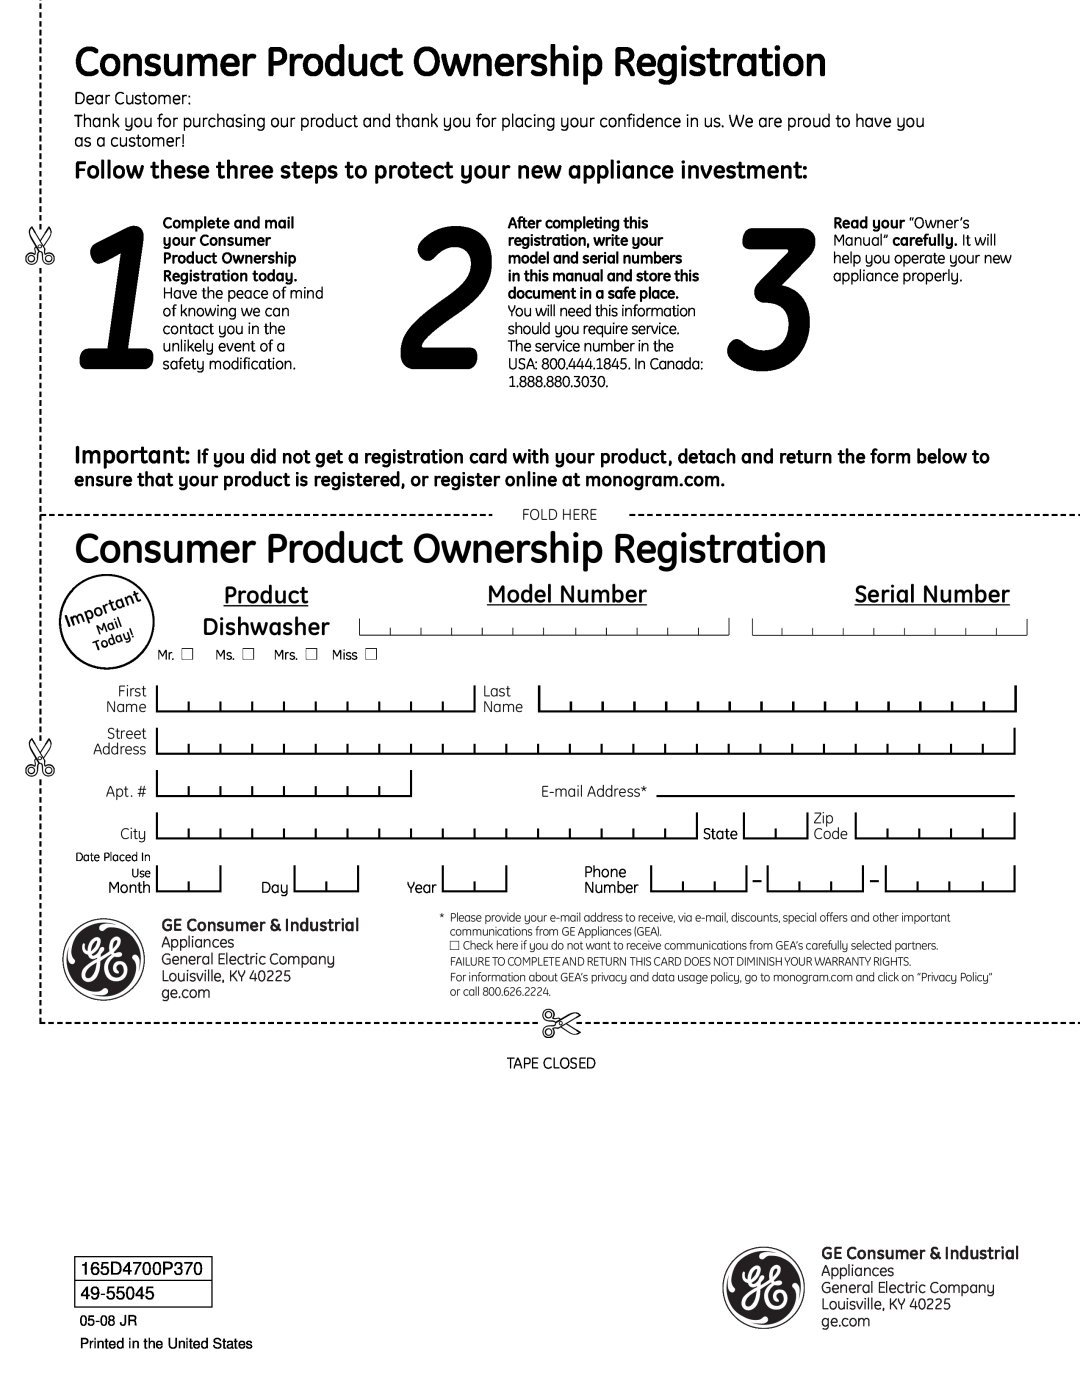 GE ZBD1870 Consumer Product Ownership Registration, Follow these three steps to protect your new appliance investment 